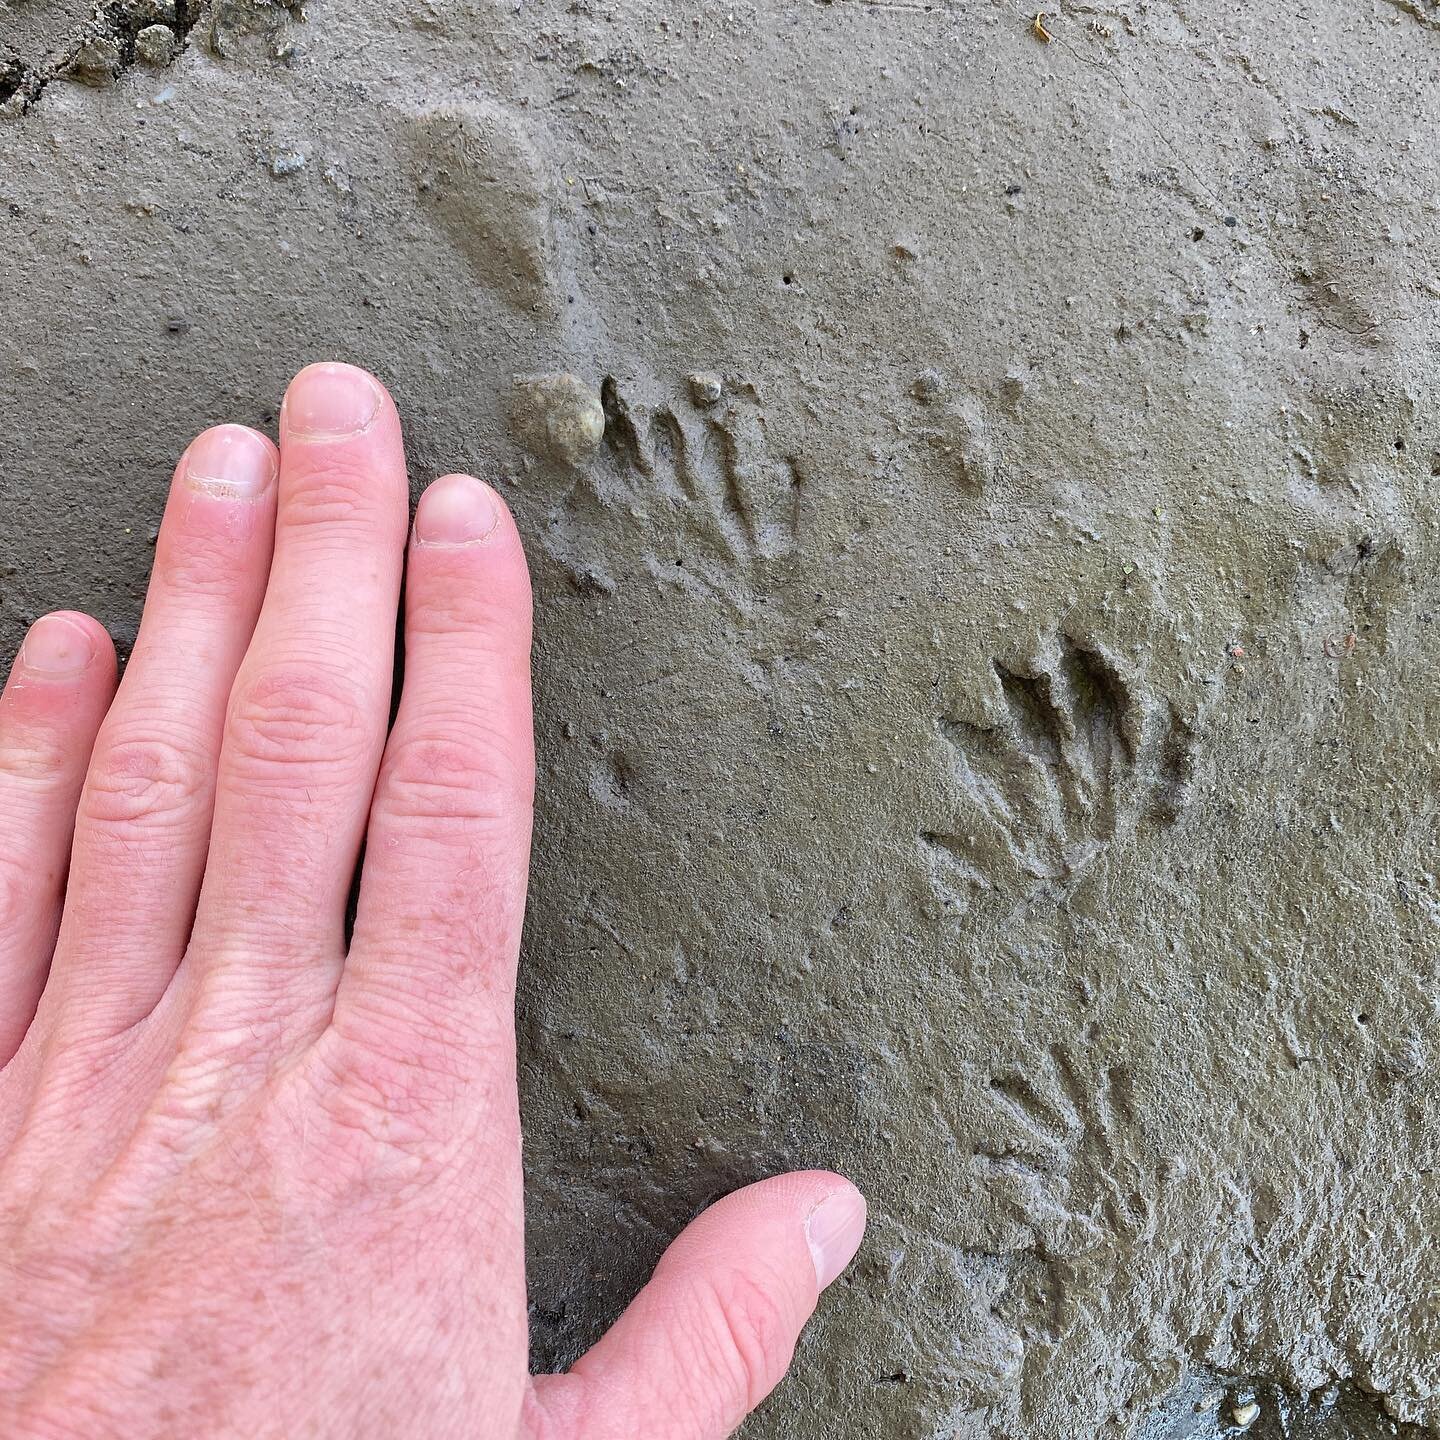 A cool set of tracks moving from the water onto the bank from this weeks free tracking basics walk. Do you recognize them?
.
.
.
.
.
.
#wildlife #wildlifetracking #nooksack #nooksackriver #lummiland #bellingham #washington #animaltracking #survival #